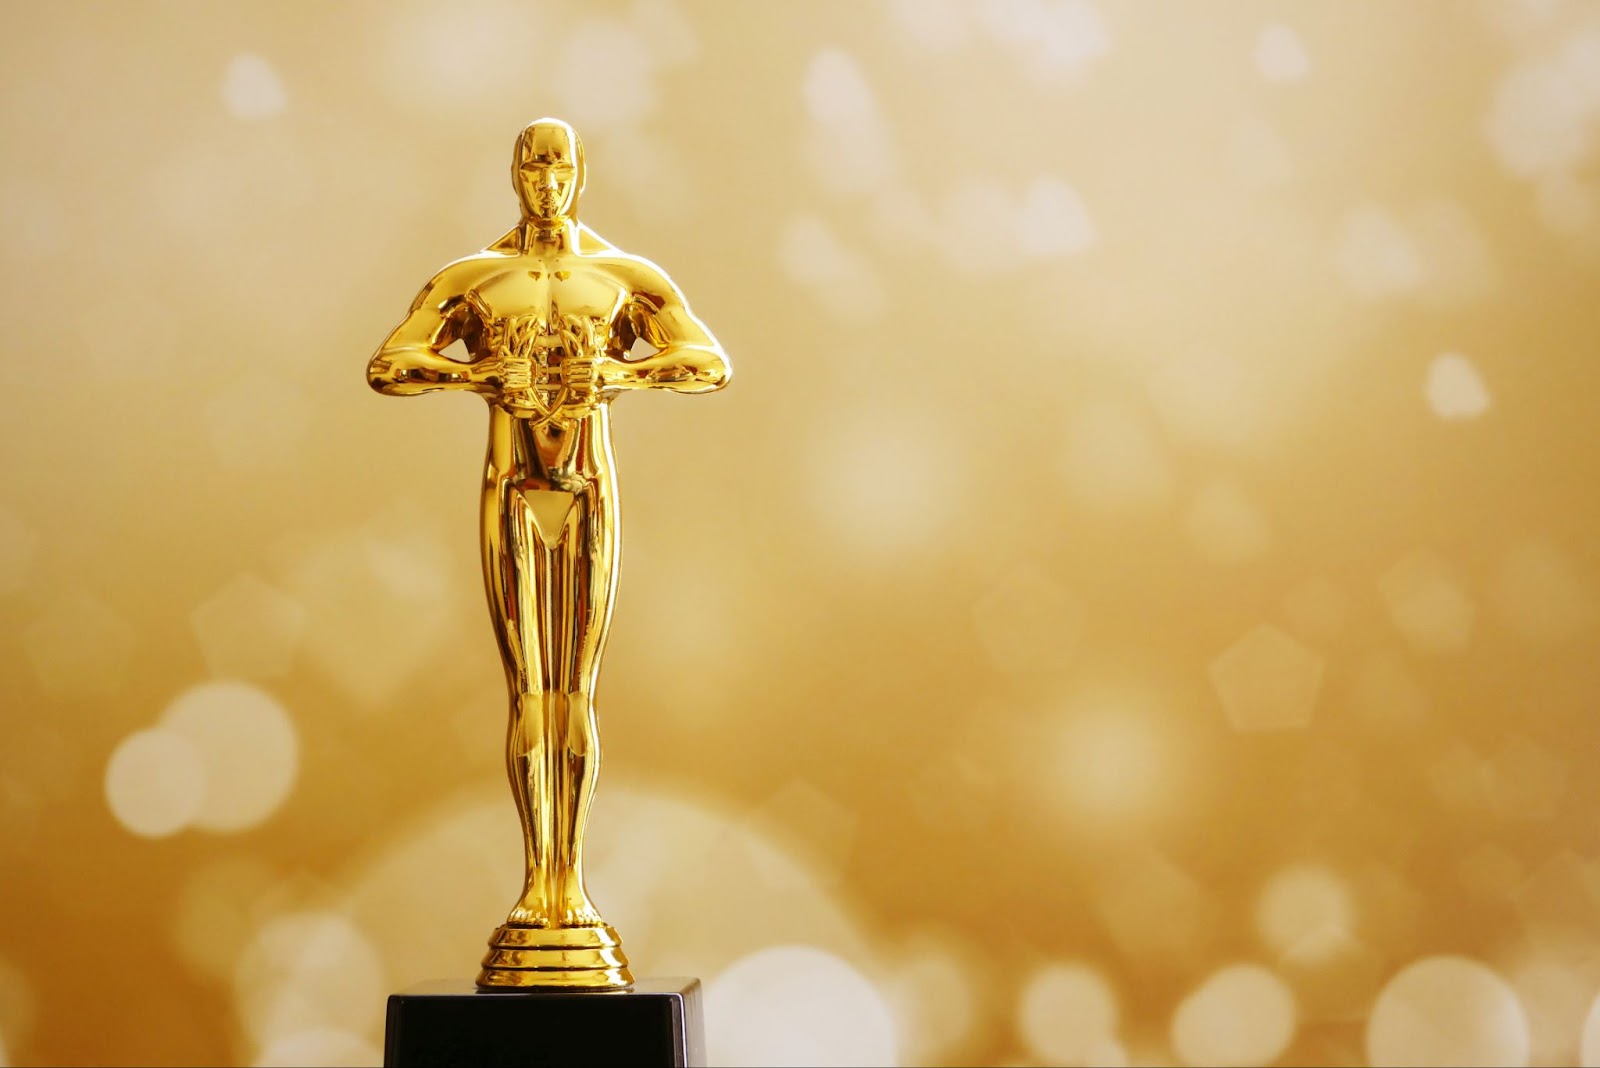 Top 5 Lessons Business Professionals Can Learn from the 96th Academy Awards